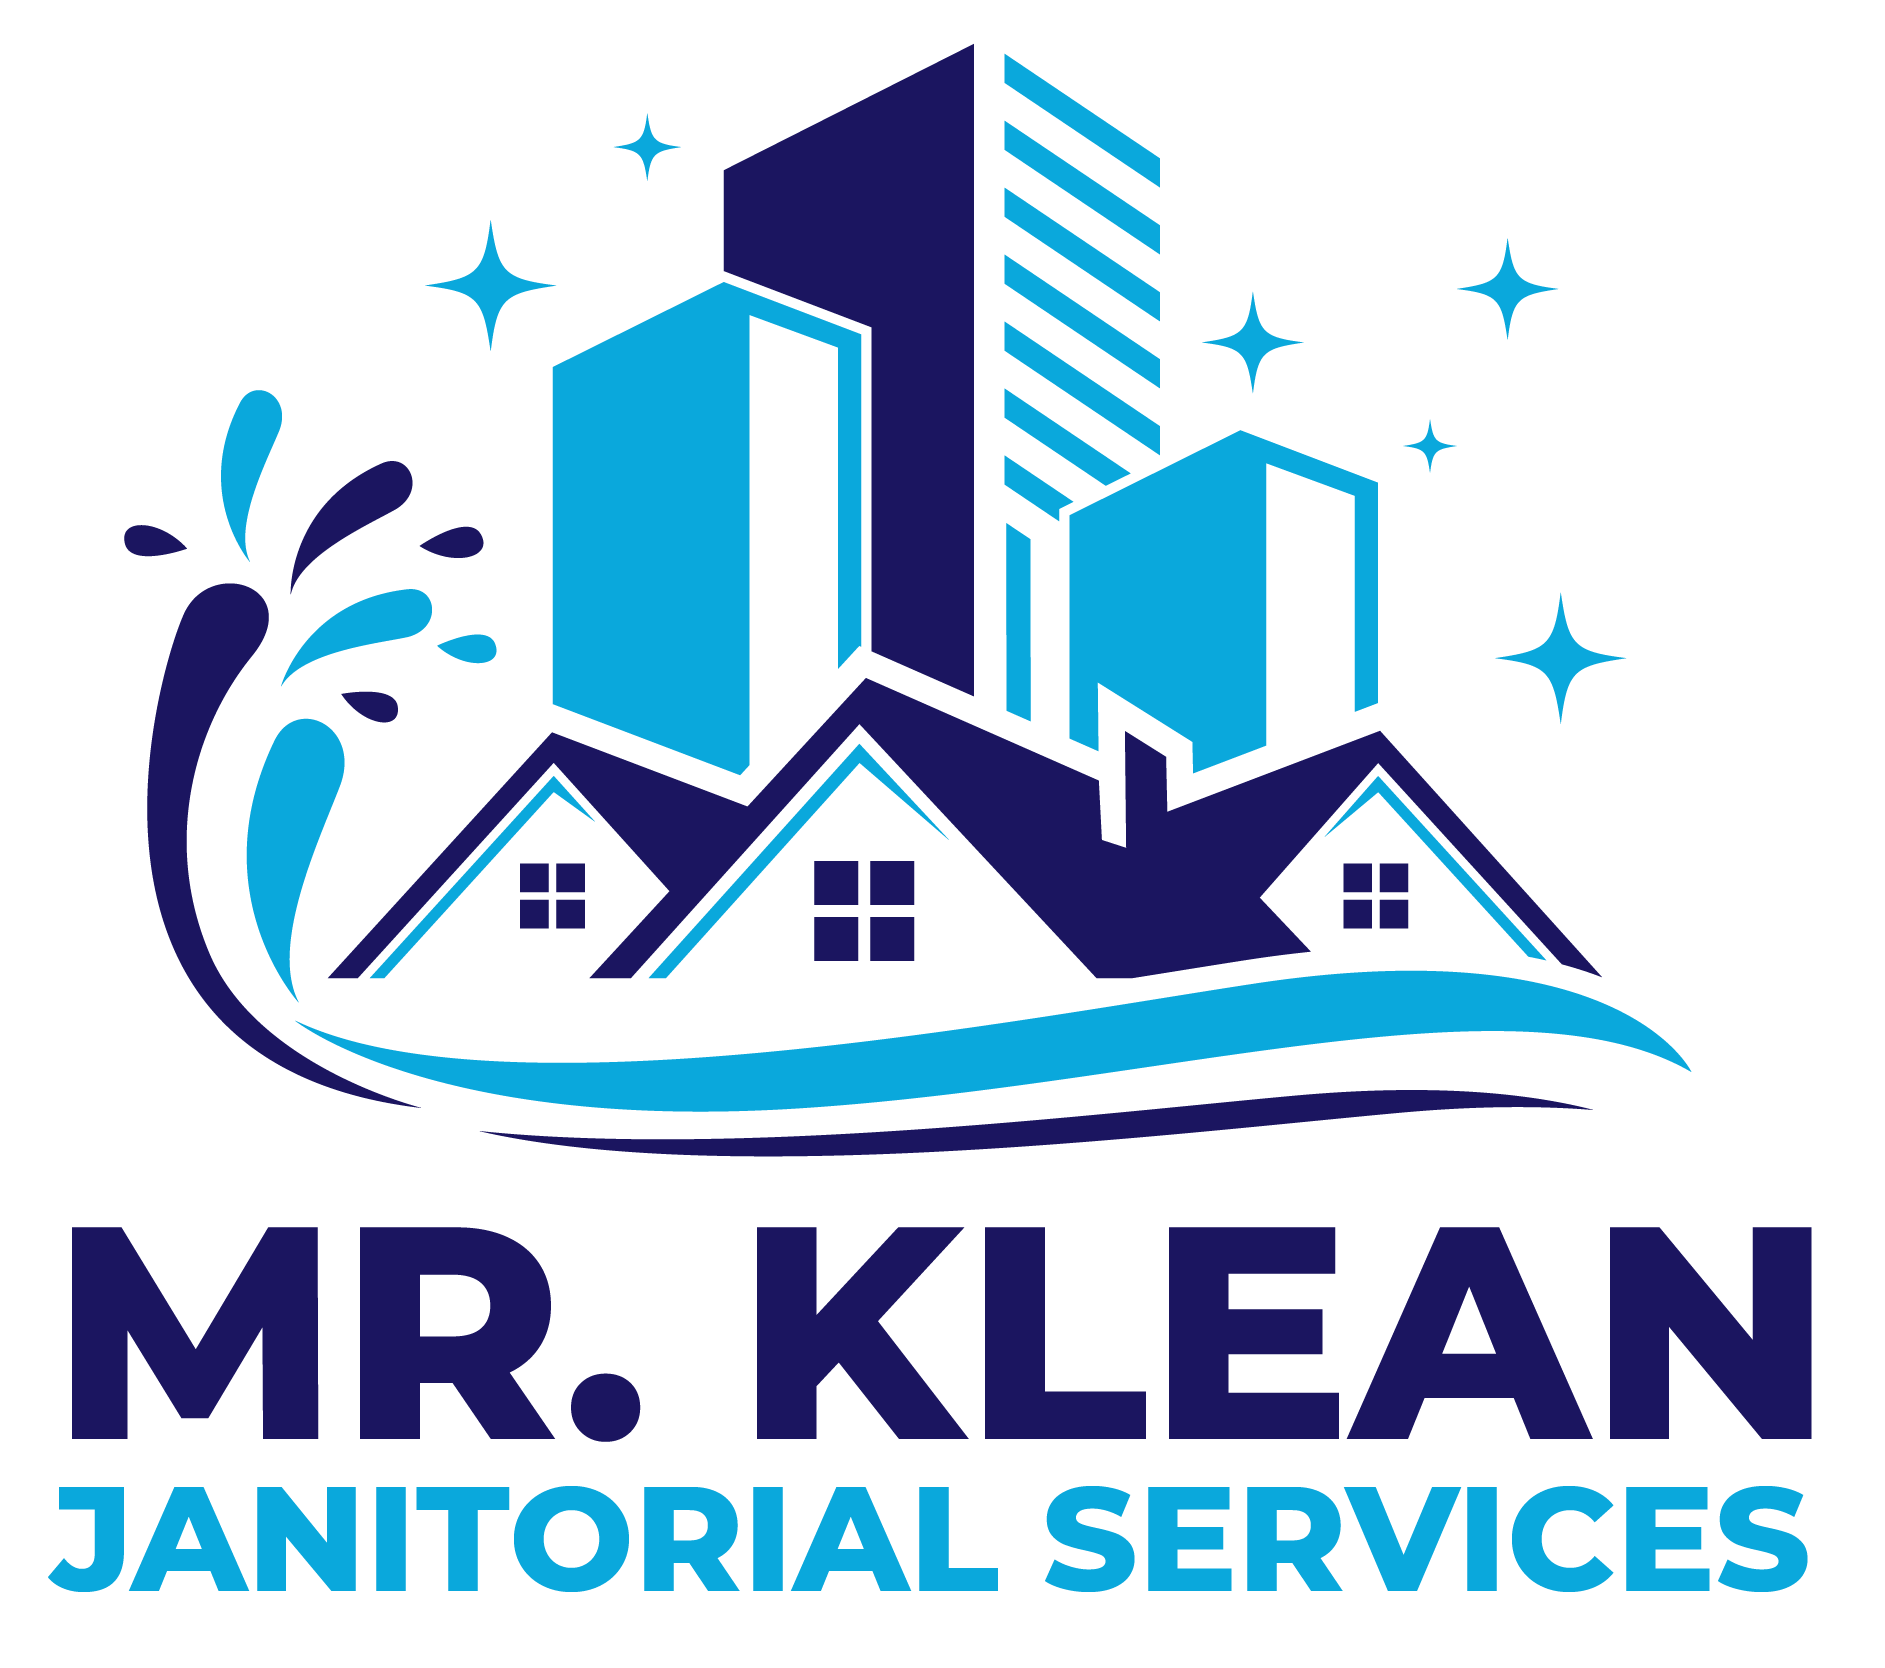 Mr. Klean Janitorial Services